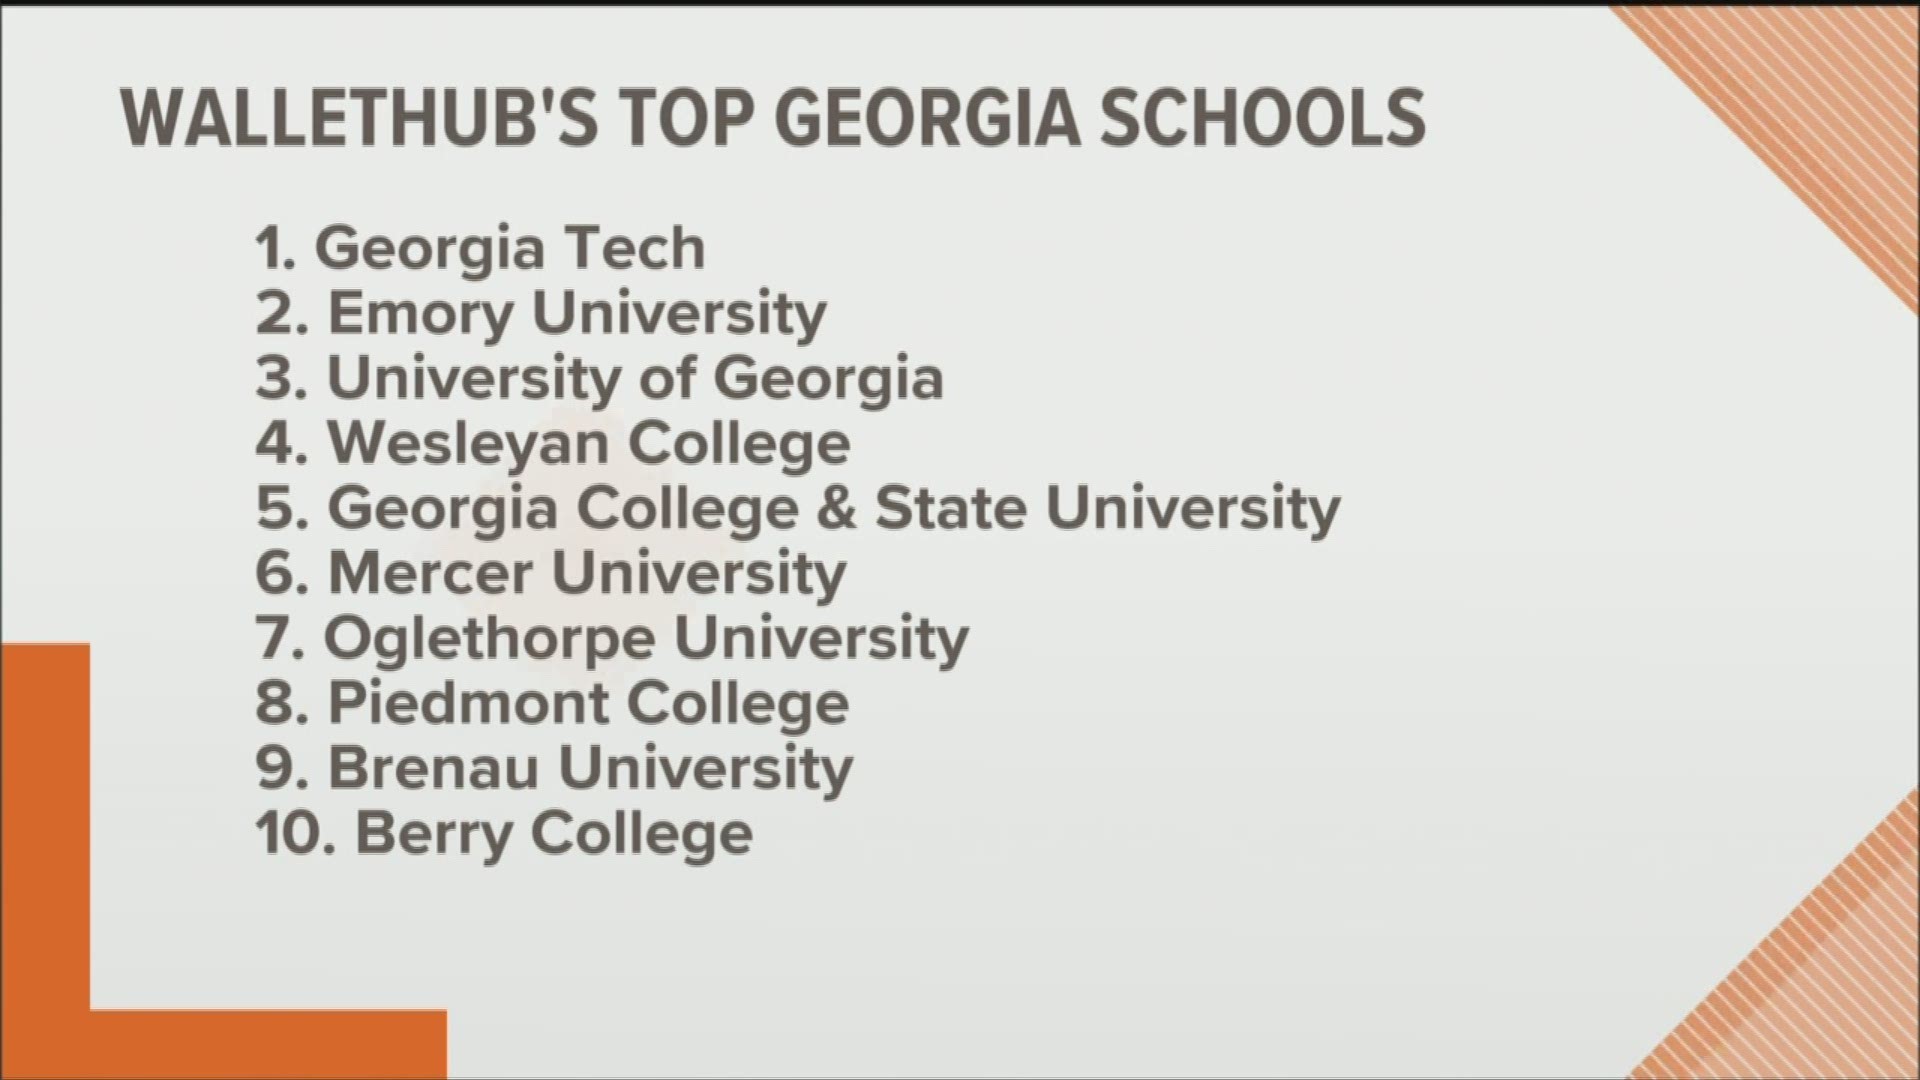 In the overall rankings of 1,000 schools across the country, Tech ranks 16th.